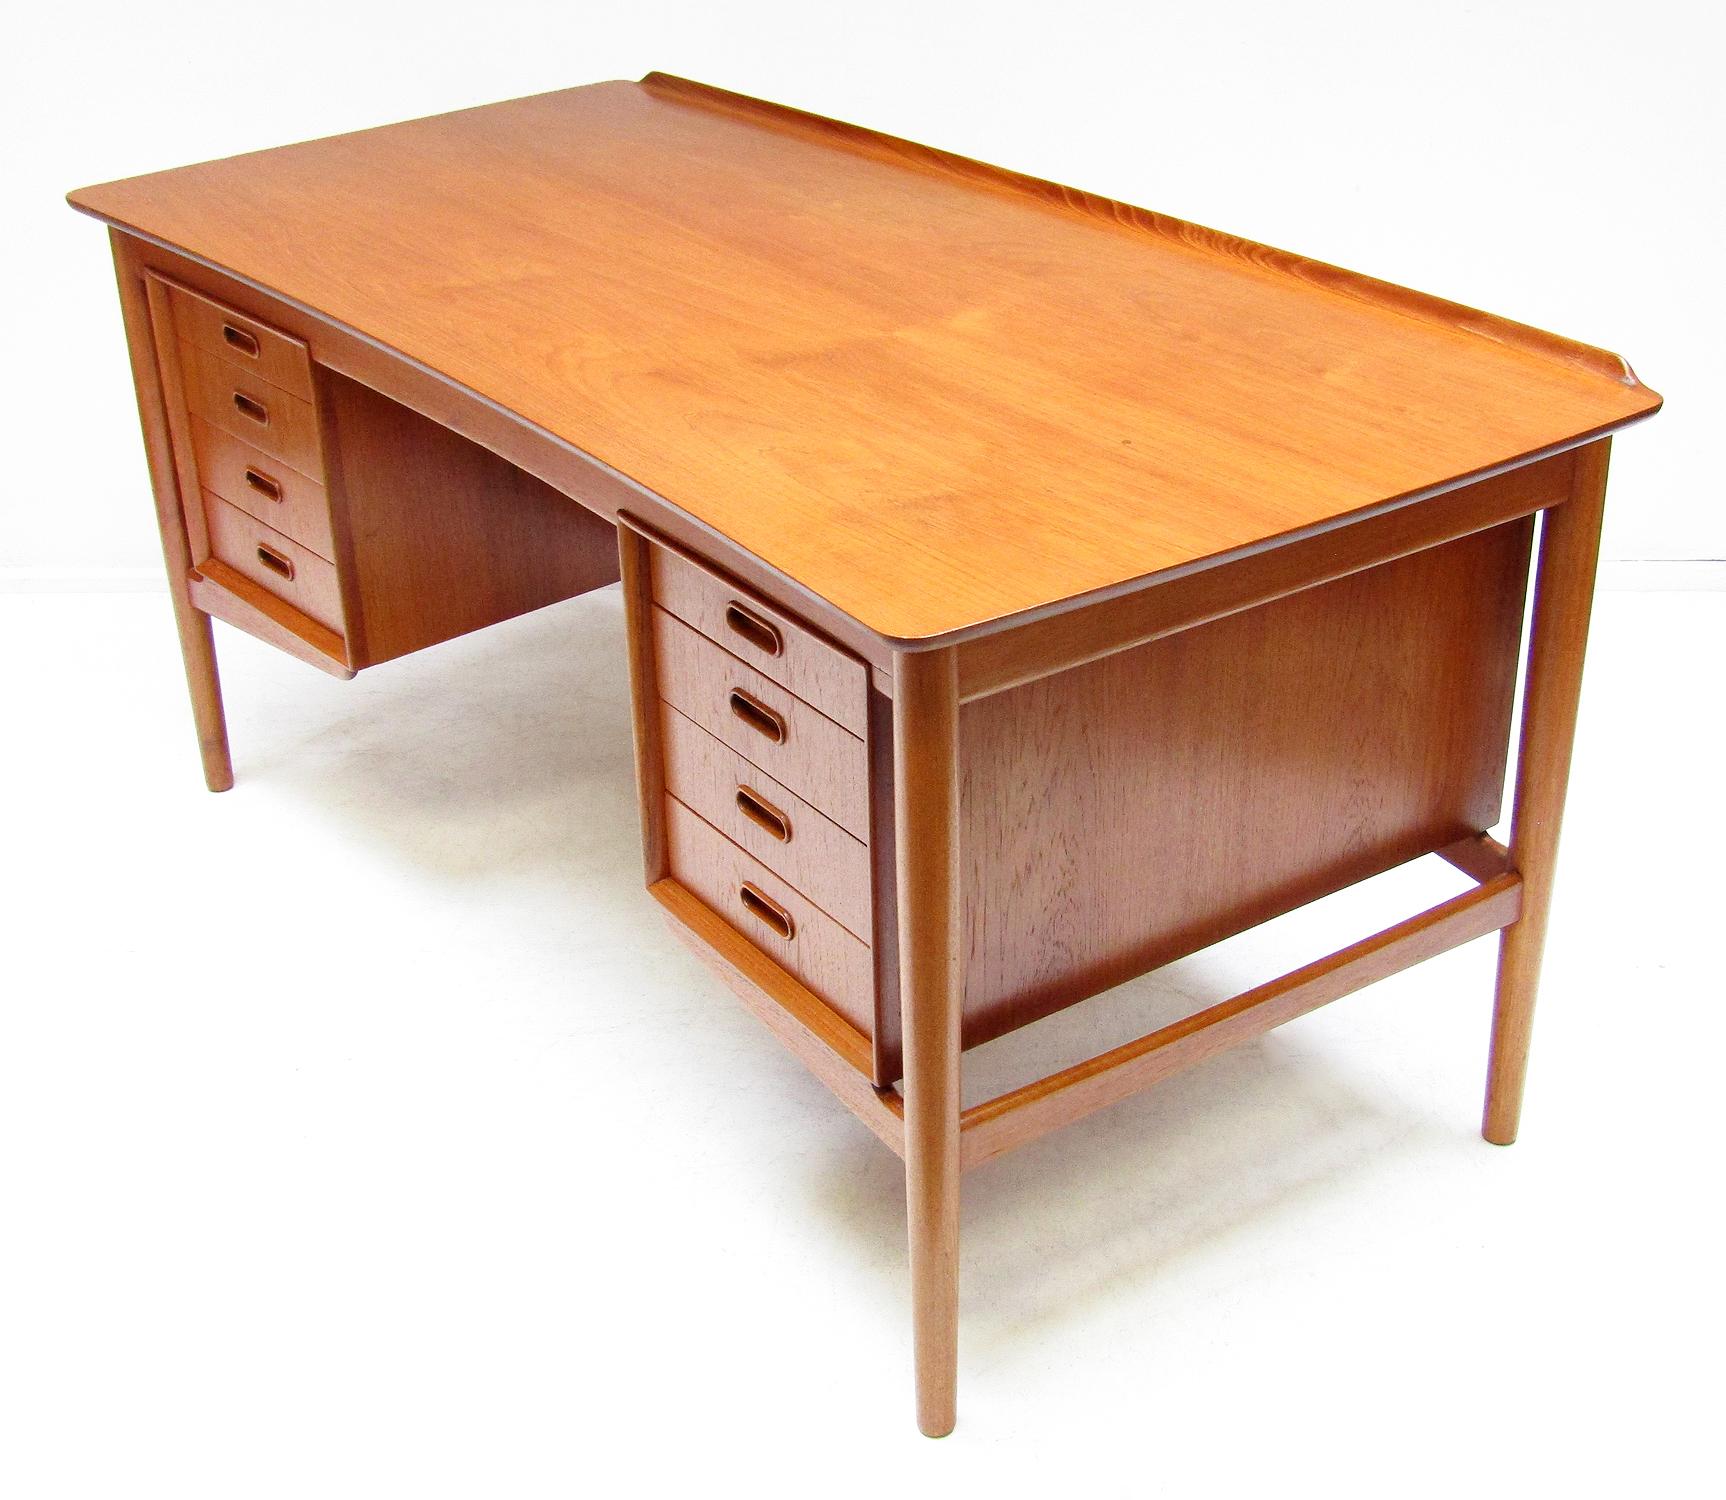 1960s Danish Desk in Teak by Svend Aage Madsen In Good Condition For Sale In Shepperton, Surrey